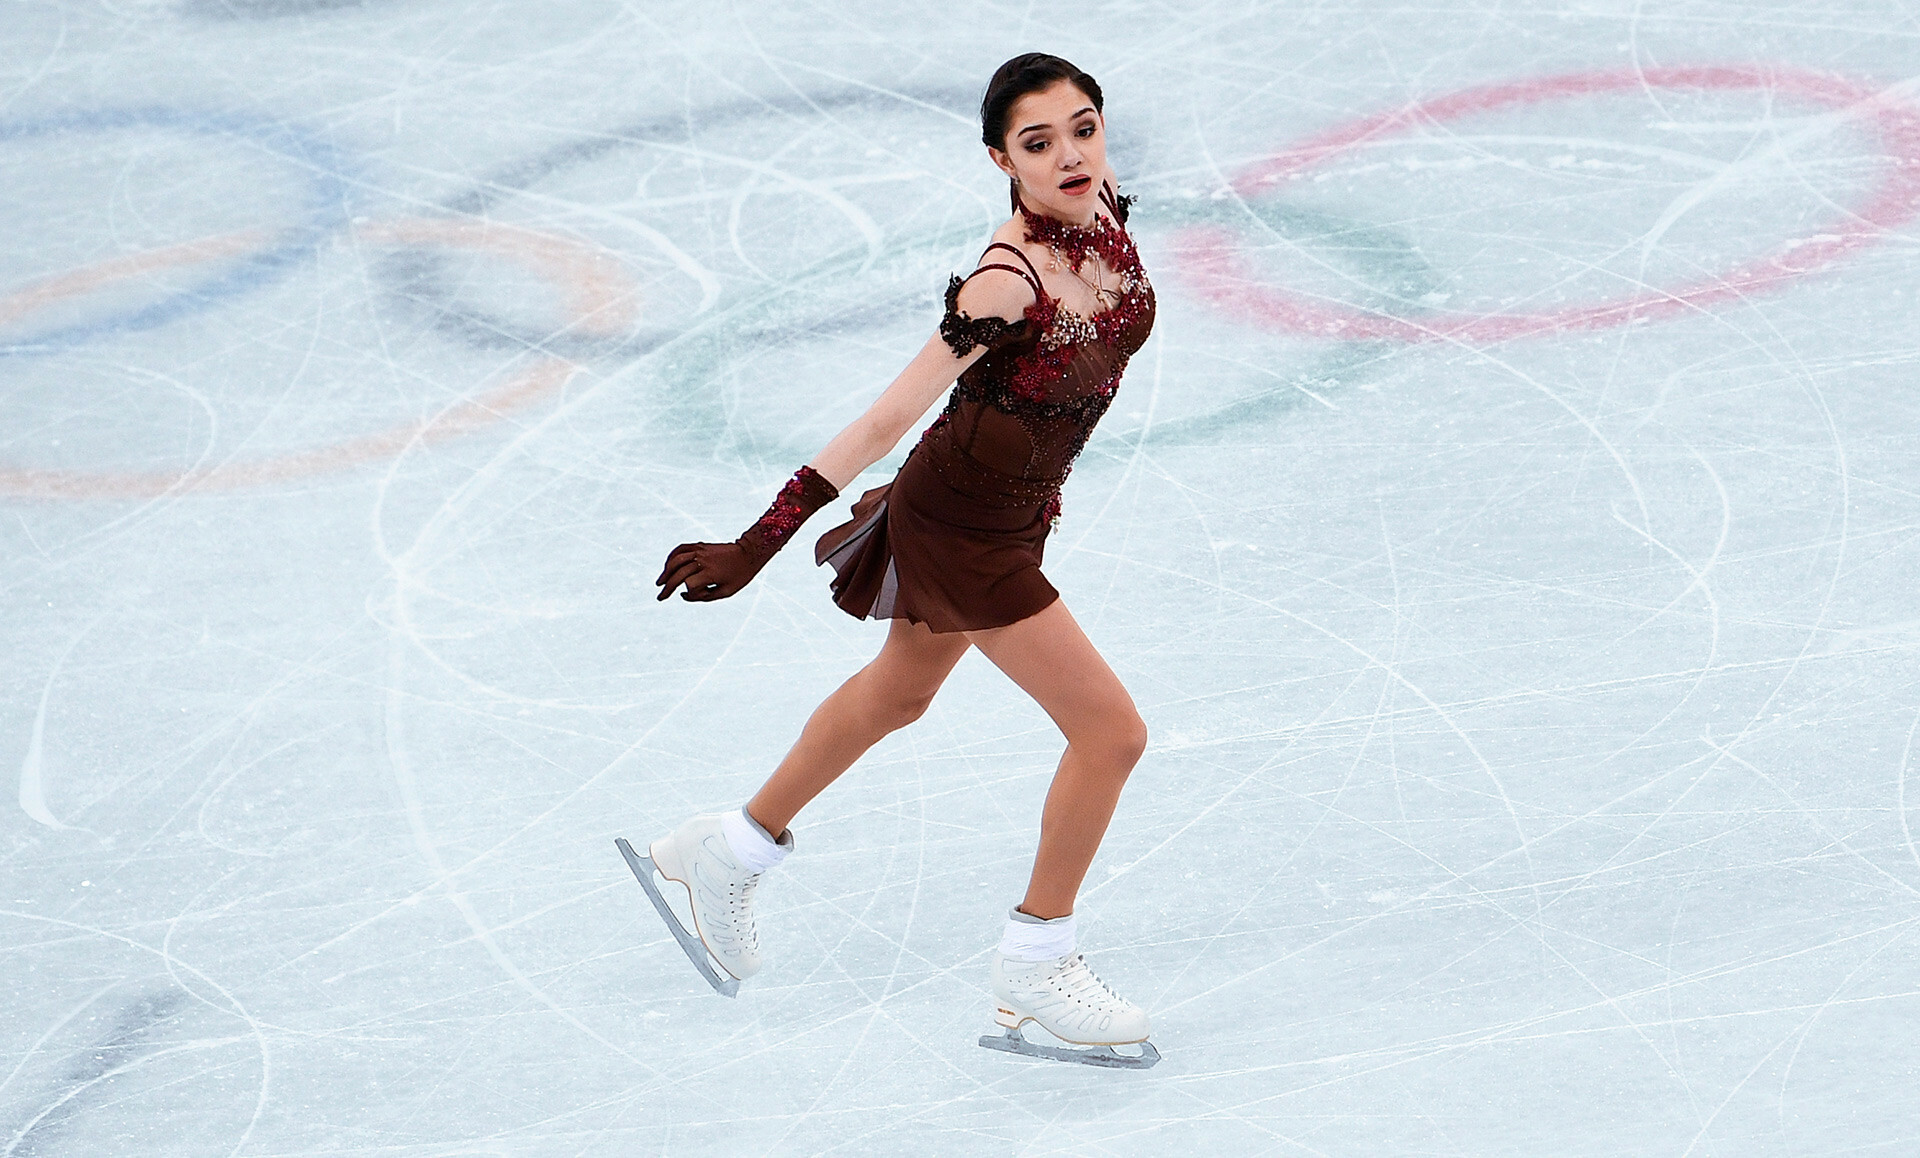 Evgenia Medvedeva: 2018 Winter Games, She placed third in both segment at the 2015 Russian Championships. 1920x1160 HD Background.